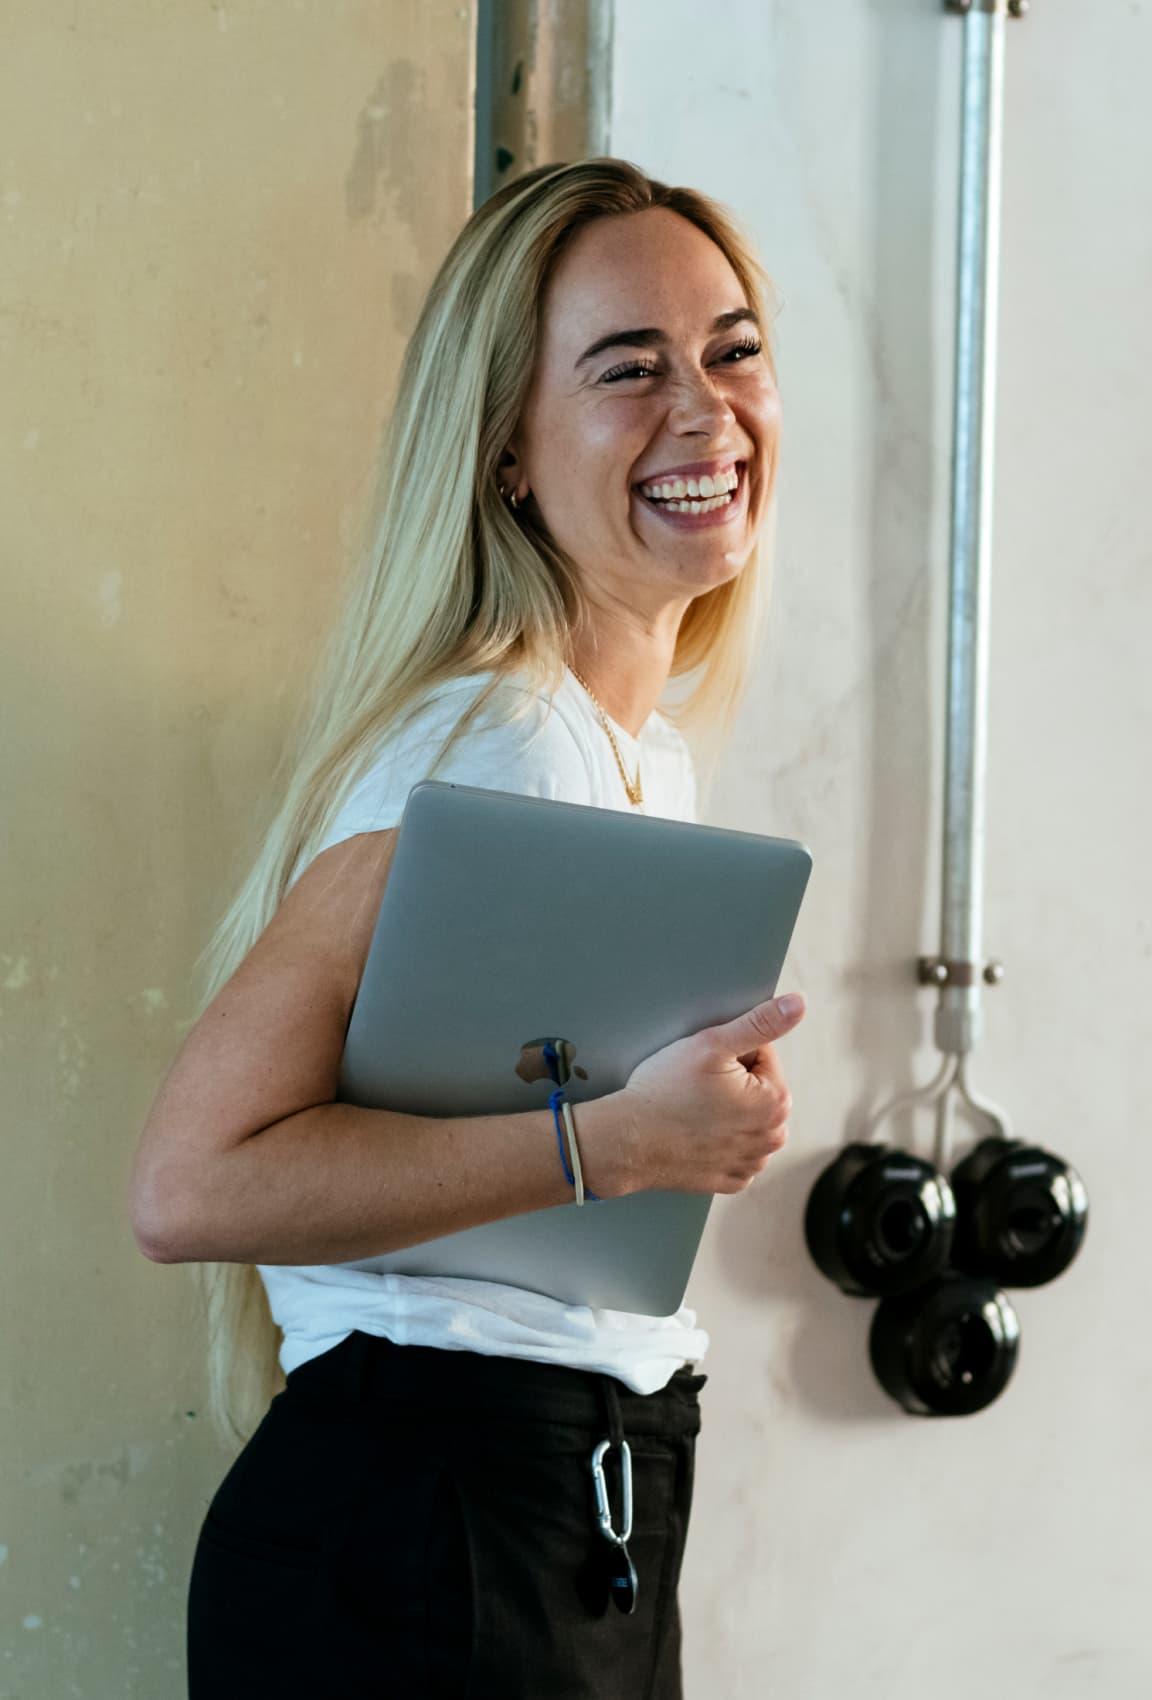 A woman smiling towards the camera holding her laptop